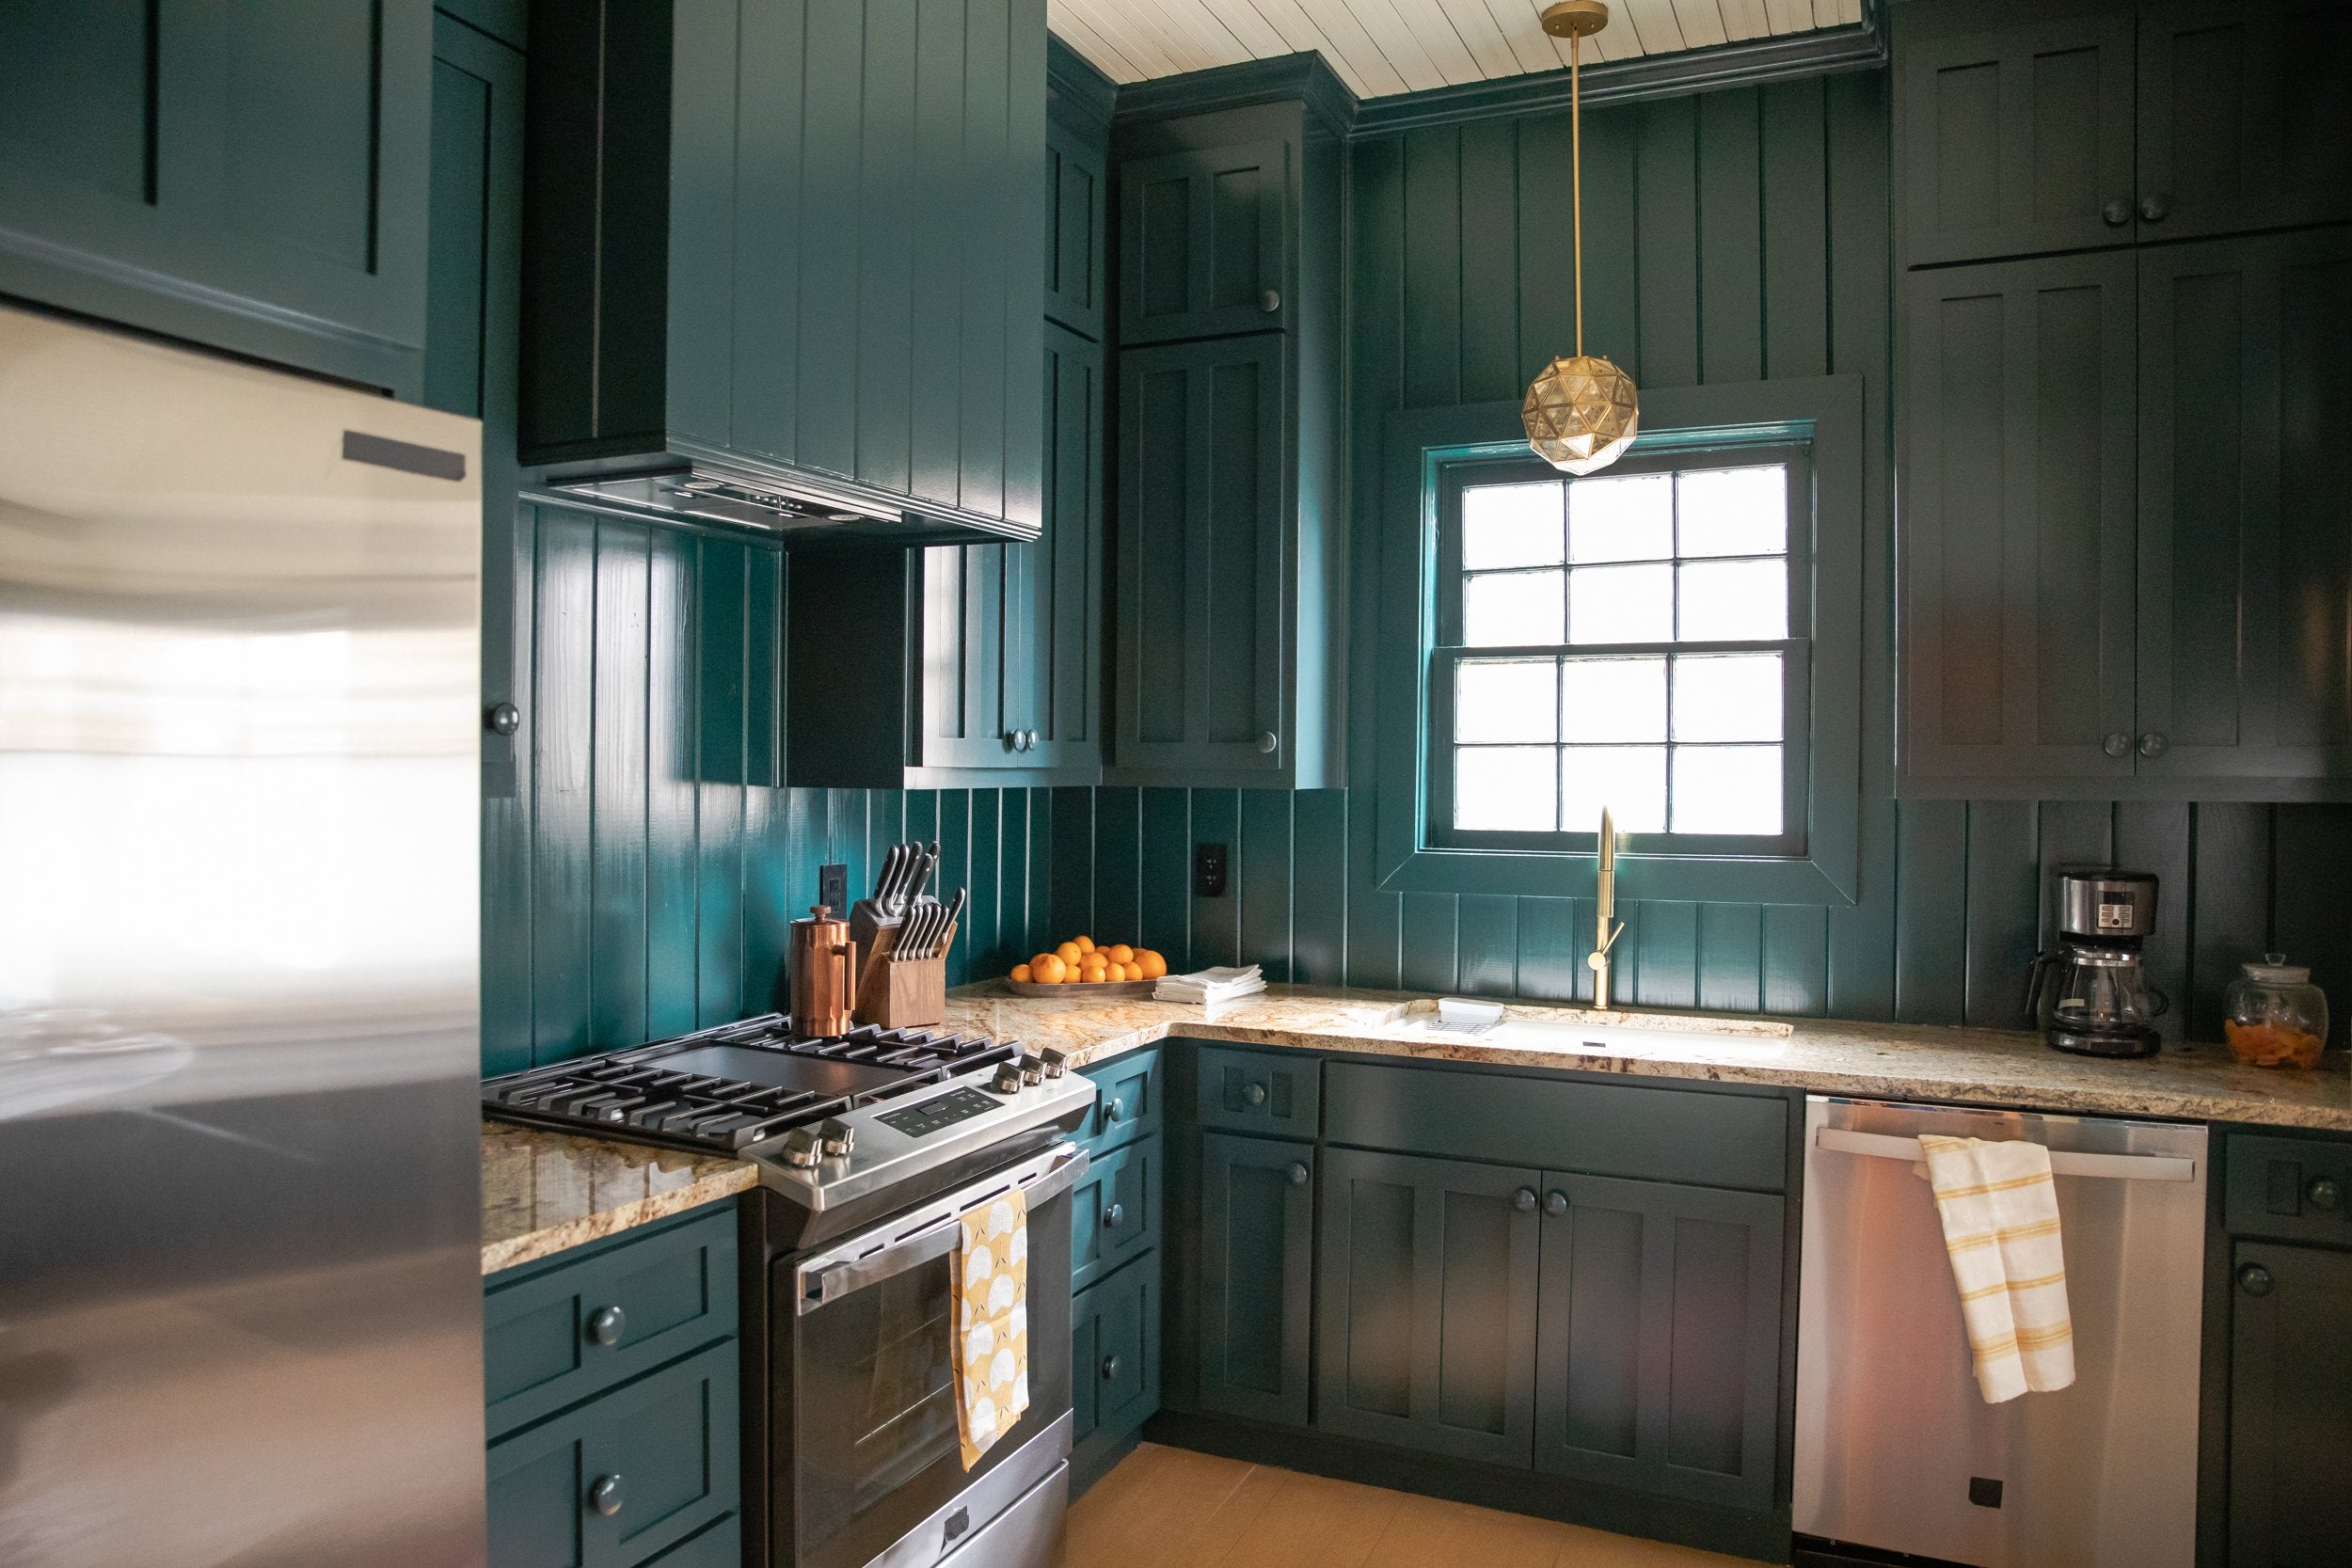 The Top 10 Most Colorful Home Town Kitchens – Laurel Mercantile Co.